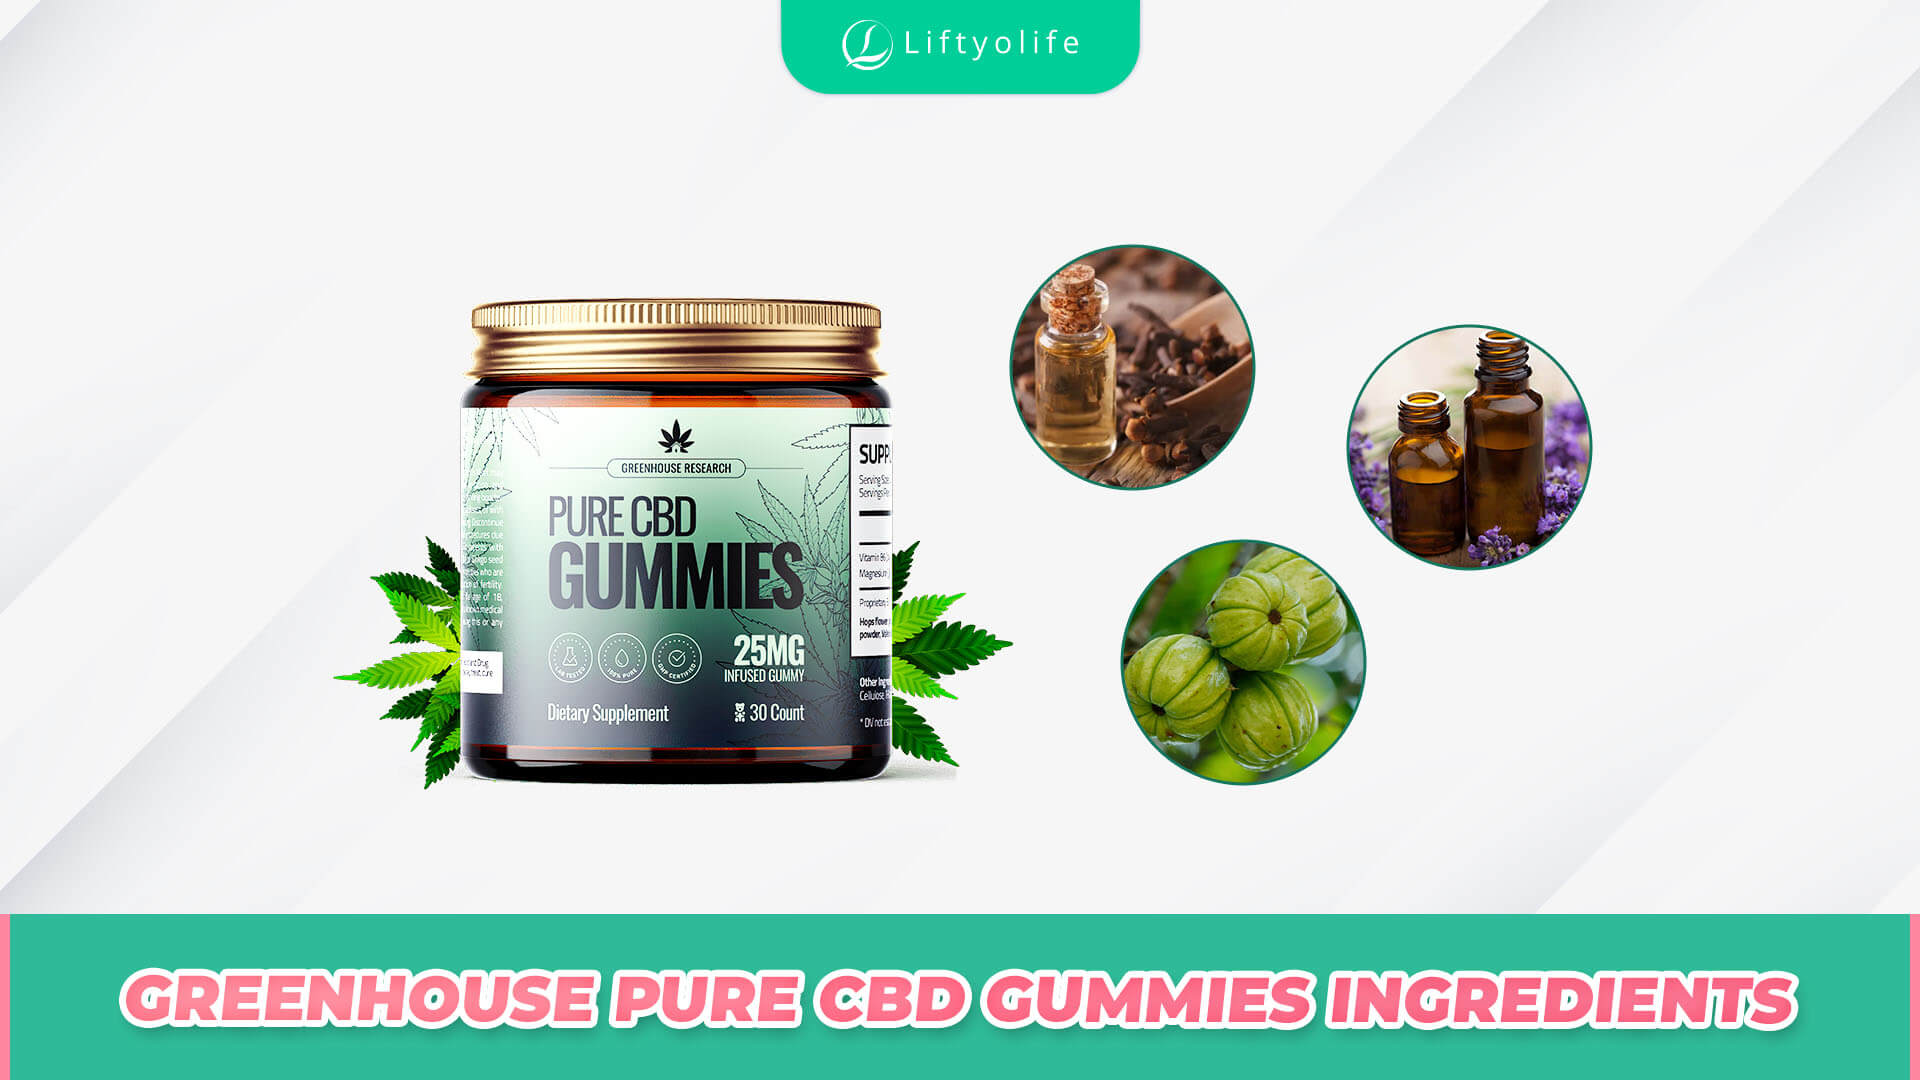 The Ingredients Of Greenhouse Pure CBD Gummies